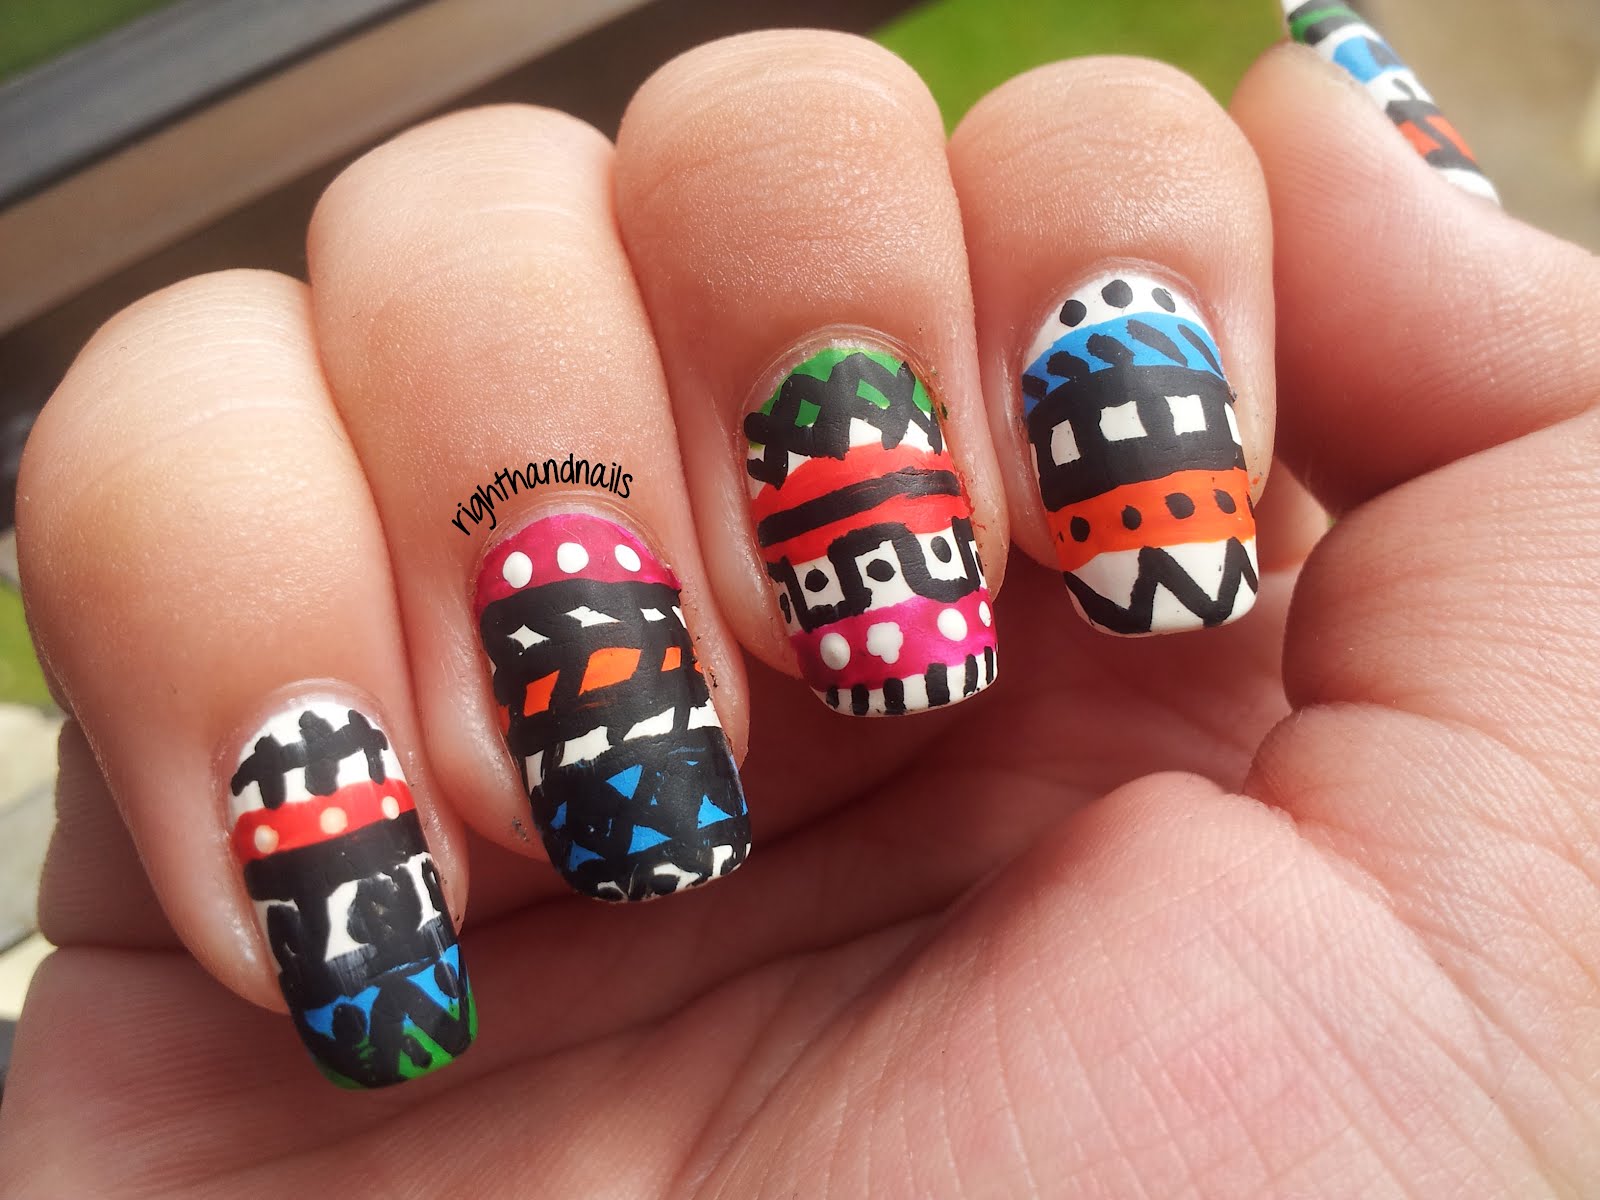 5. Tribal Nail Designs for Guys - wide 5